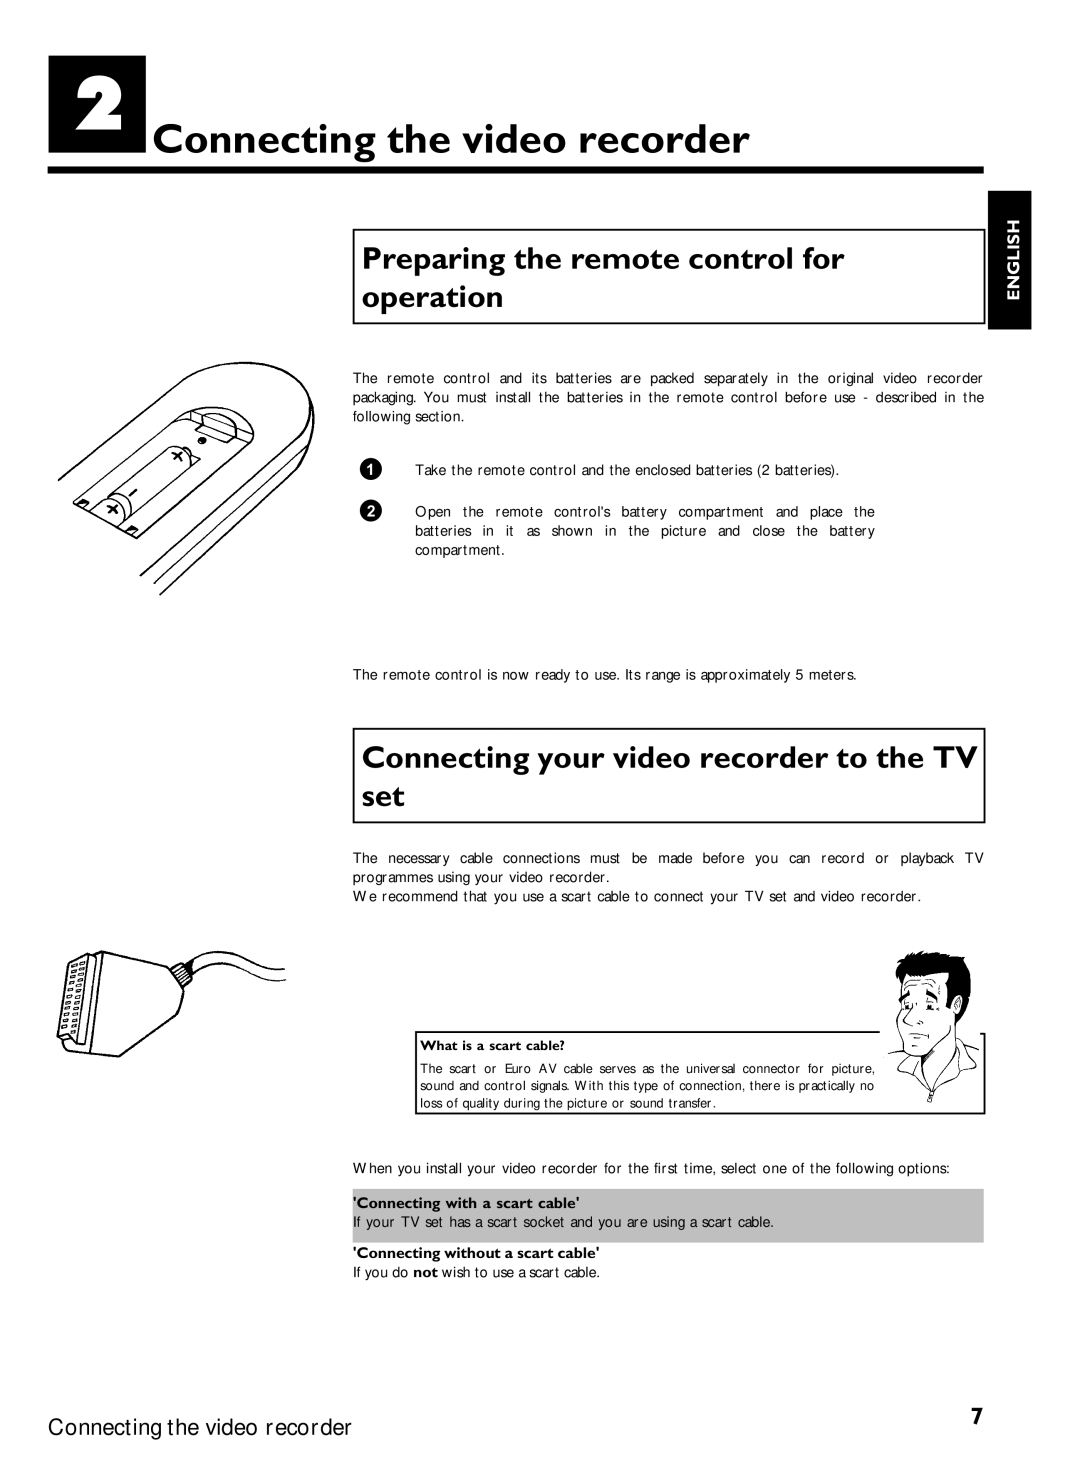 Philips VCR VR 170/07 Connecting the video recorder, Preparing the remote control for operation, What is a scart cable? 